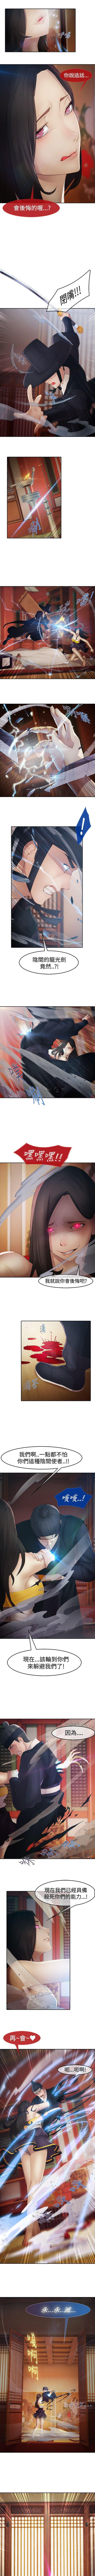 Groupsex 蝴蝶之夢 1-26 Bokep - Page 6